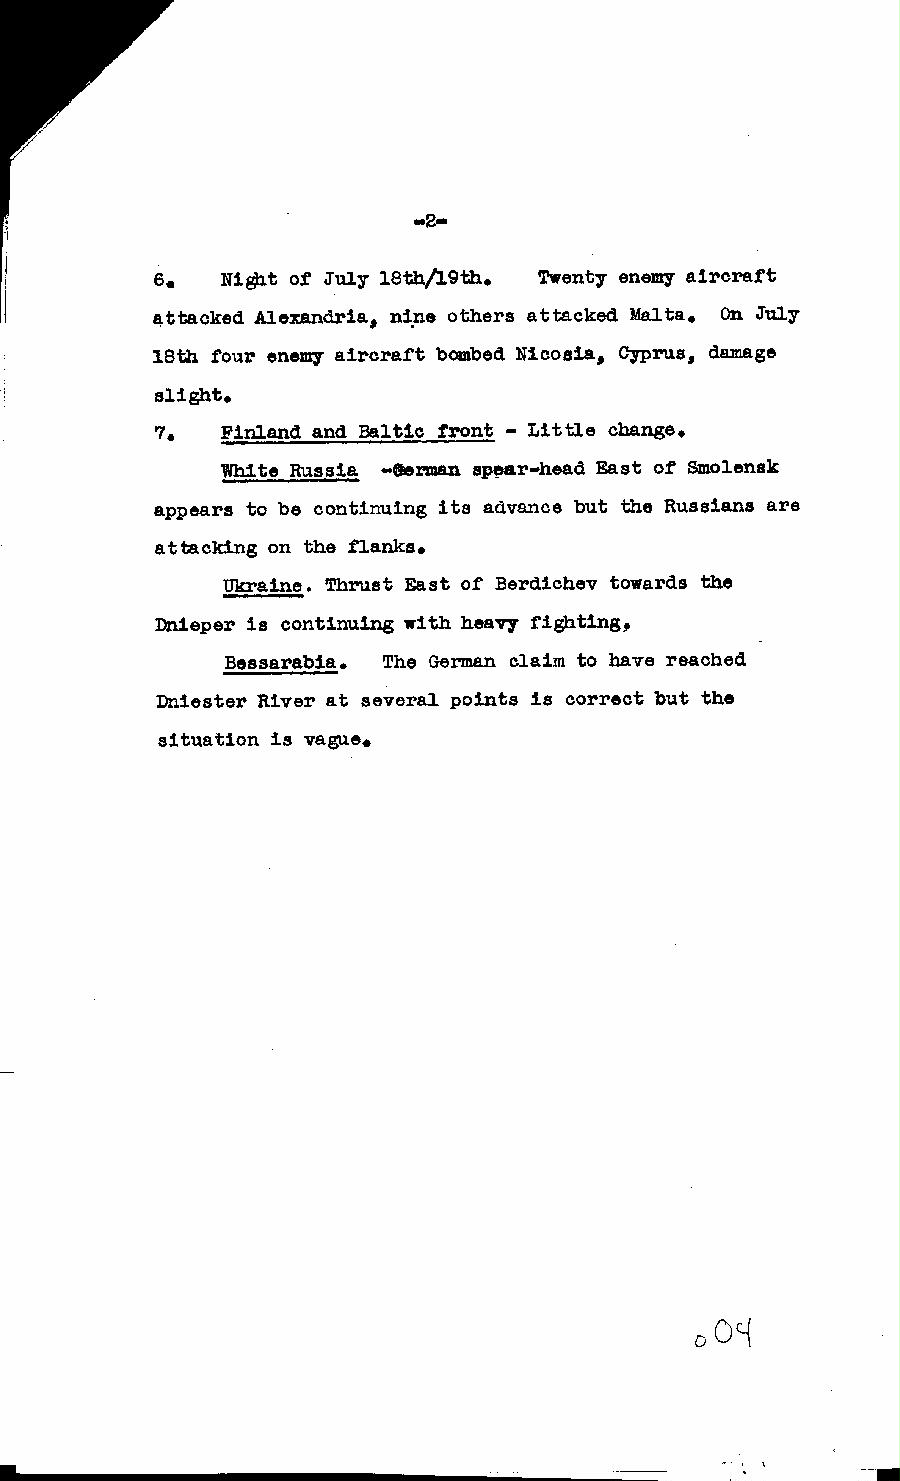 [a322o04.jpg] - Cont-Report on military situation 7/20/41